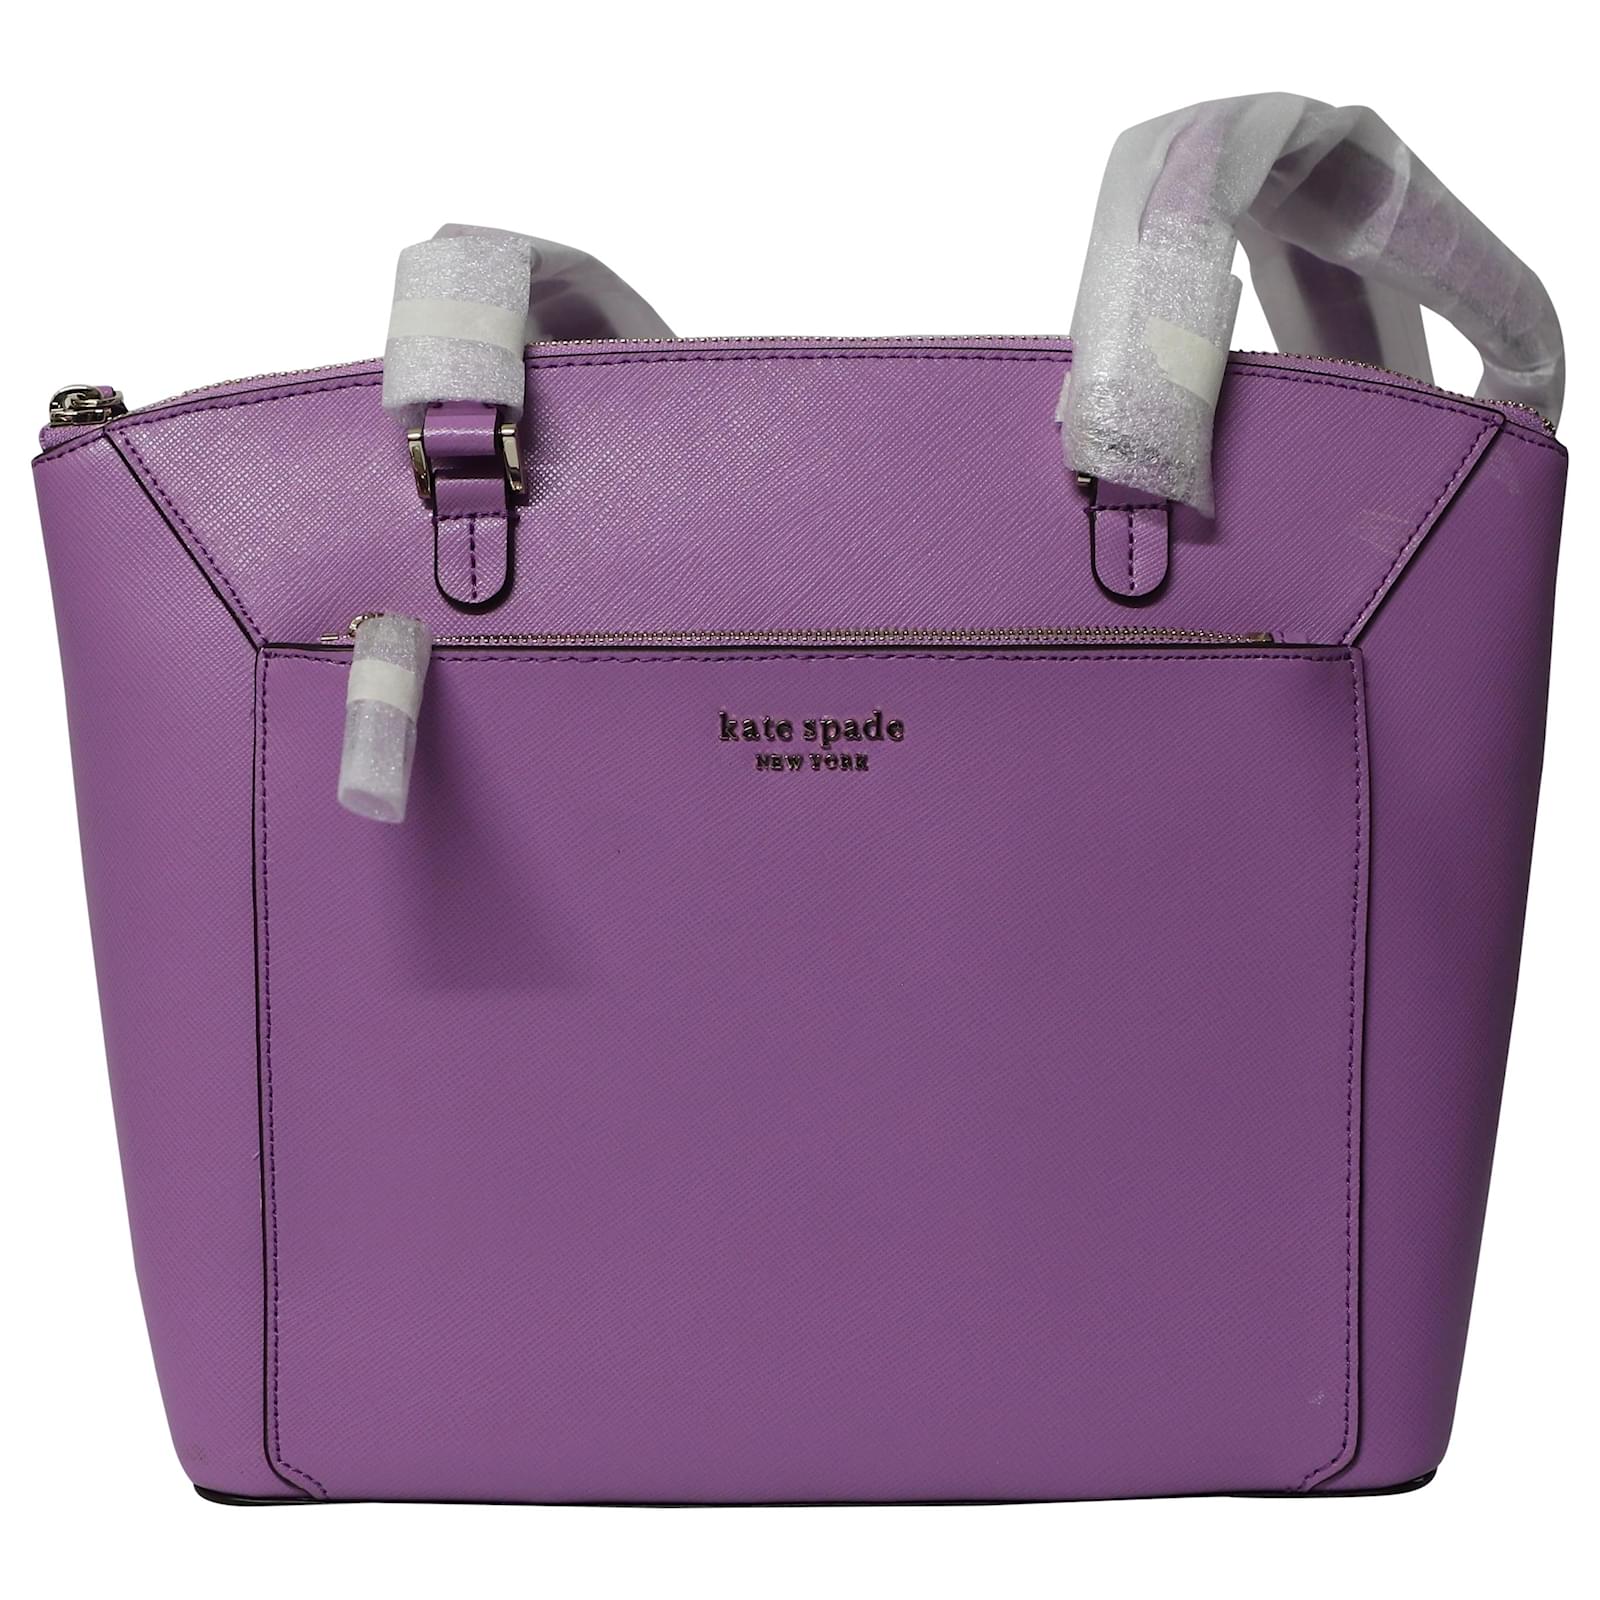 Louis Feraud F-00057216 Tote Bag for Women - Leather, Purple: Buy